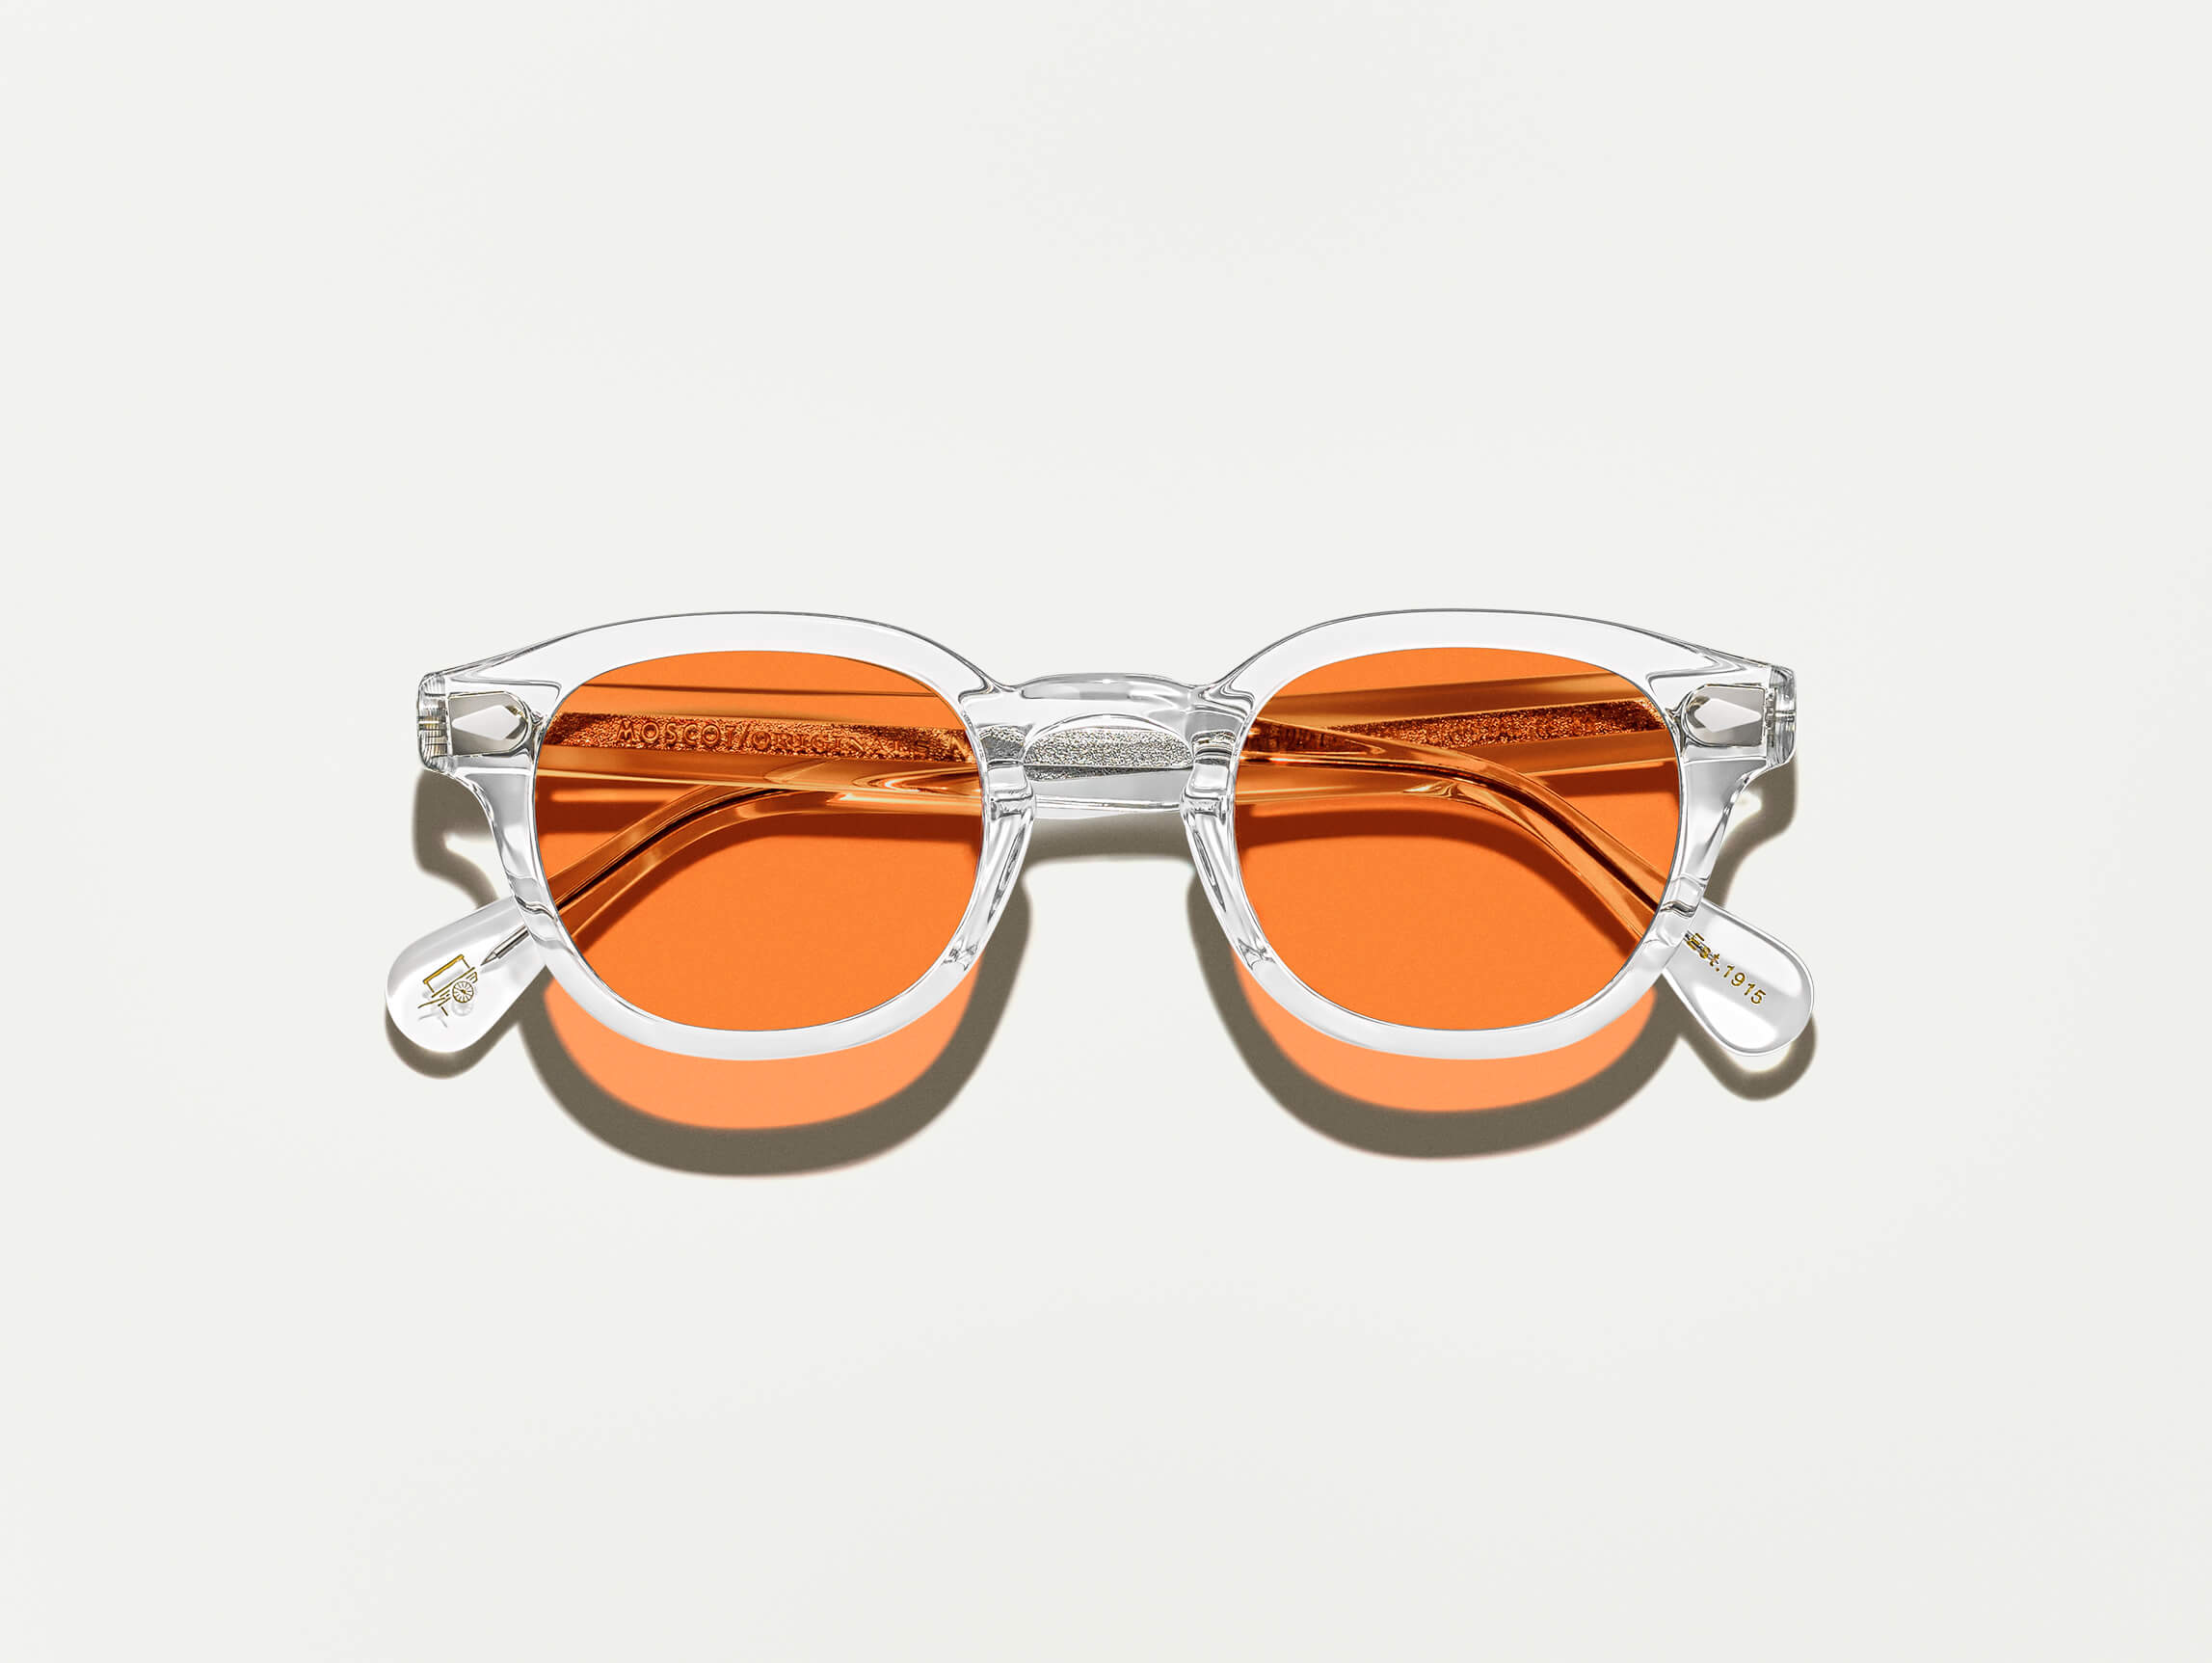 The LEMTOSH Crystal with Woodstock Orange Tinted Lenses